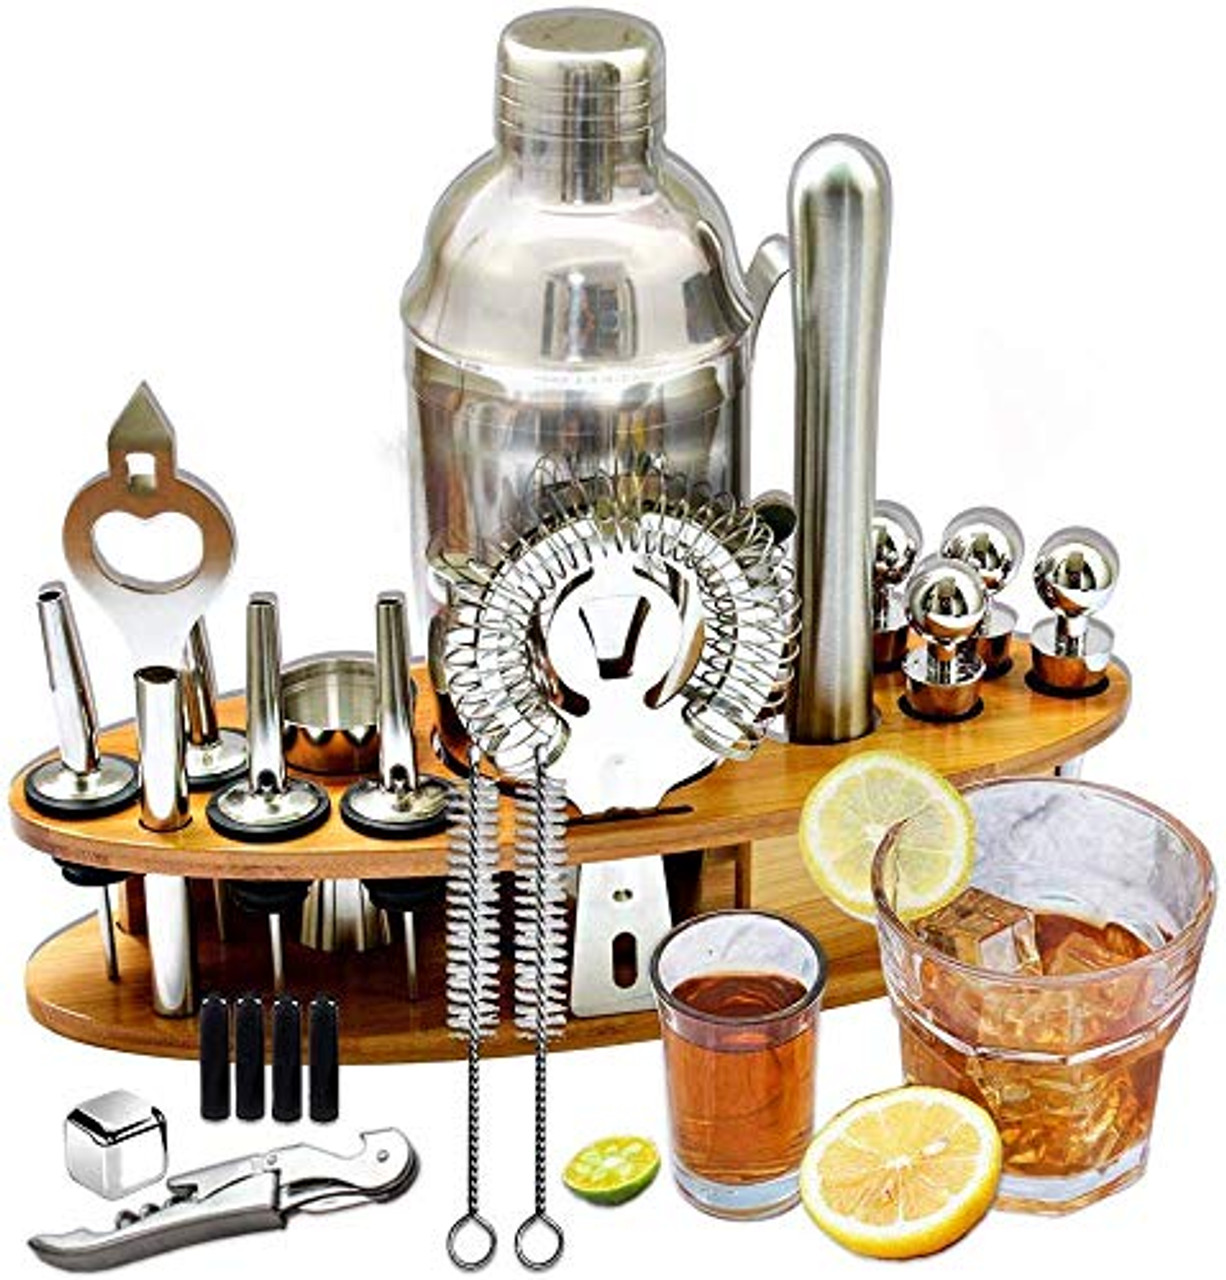  Soing Black 24-Piece Cocktail Shaker Set,Perfect Home  Bartending Kit for Drink Mixing,Stainless Steel Bar Tools With Stand,Velvet  Carry Bag & Recipes Included: Home & Kitchen